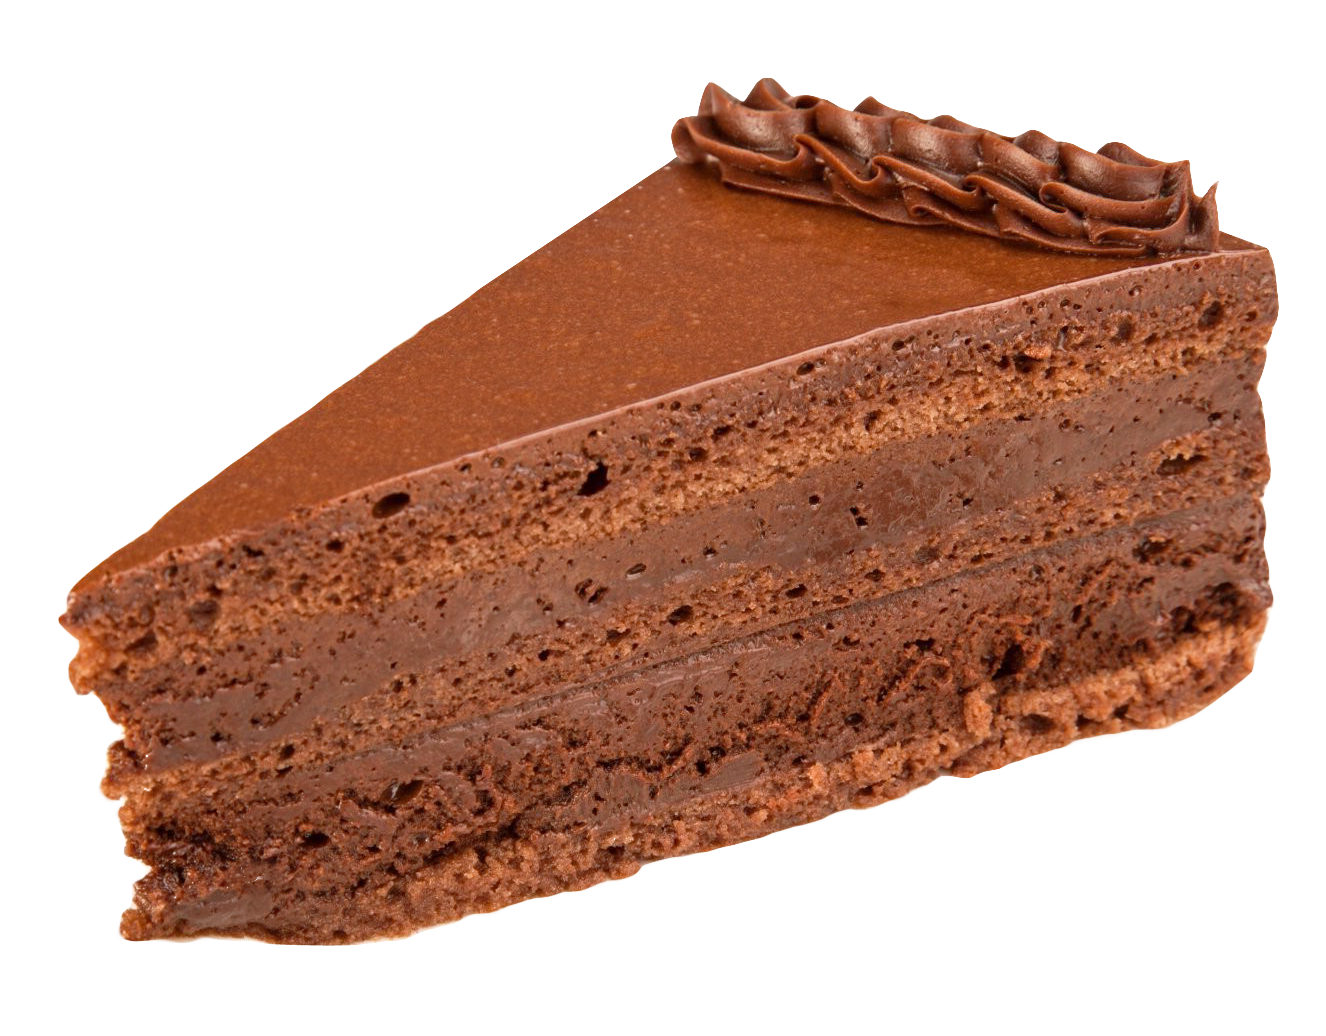 Cake PNG image transparent image download, size: 2053x1721px